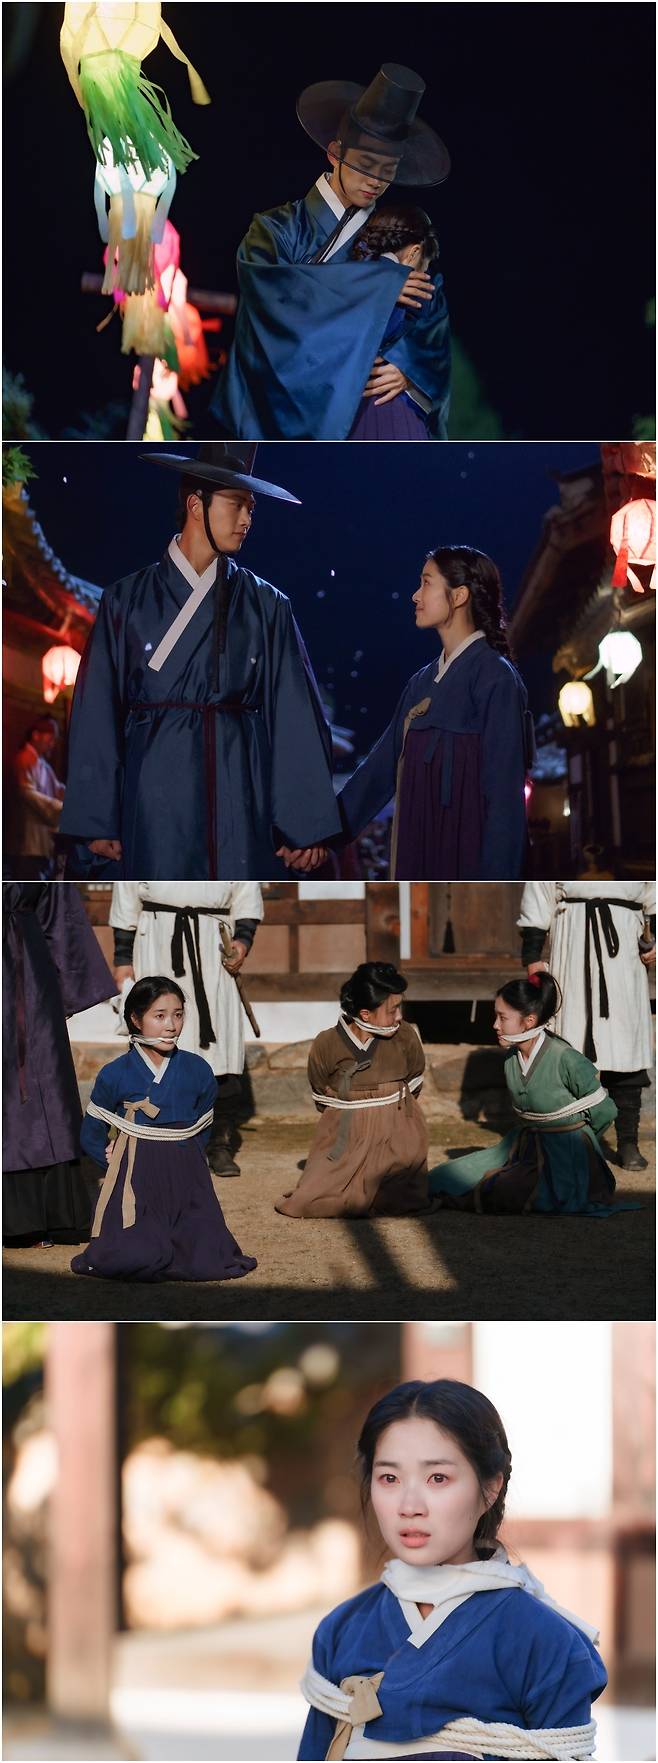 Ok Taek-yeon, Kim Hye-yoon, is the Slap.TVNs Drama Assa and Joy (played by Lee Jae-yoon/directed by Yoo Jong-sun and Nam Sung-woo and Jung Yeo-jin) will hit the turning point starting from the 9th episode, which airs on December 6.I wonder what changes Lion (Ok Taek-yeon) and Kim Joy (Kim Hye-yoon) will make from death.Here, Joy, Byoung-ryung (Chae One Bin), and Danger of Gwang-sun (Lee Sang-hee), who headed for Gabbi-go, are caught and expect the second film to be more dynamic.In the last broadcast, the investigation team found Baek Gwi-ryeong hidden by Park Tae-seo (Lee Jae-gyun).However, Park tried to blow up the investigation team as well as the mine with a bomb, and Ian Thorpe saved Joy and died.The death of Ian Thorpe also flowed into the ear of the king; Park Seung (Jung Bo-seok), who brought together the king and his deputies, insisted that the great priest (Park Chung-sun) take responsibility for it and step down.At that time, the resurrection of Ian Thorpe, who entered the battle, gave a reversal and opened the door of the second act thrillingly.The photo shows The Slap Ian Thorpe and Joy in the middle of the Seven Stone Festival, two people hugging each other without any gaps.A deep hug that feels more sincere than any other word makes them guess their daunting hearts. A thrilling night walk date was also captured.The tightly held hands and the sweet eyes toward each other make the hearts of the viewers pound.In addition, Joy, the figure of Joy, the spirit, and the light that were dragged to the top of the curve add to the Danger feeling.But it doesnt seem as green as I expected to find her. Joy, looking at someone with a bewildered, pathetic face.The reddened eyes that seem to pour tears at once make me sad.Indeed, he is curious about whether he can meet his dream mother, and what Danger has come to them.